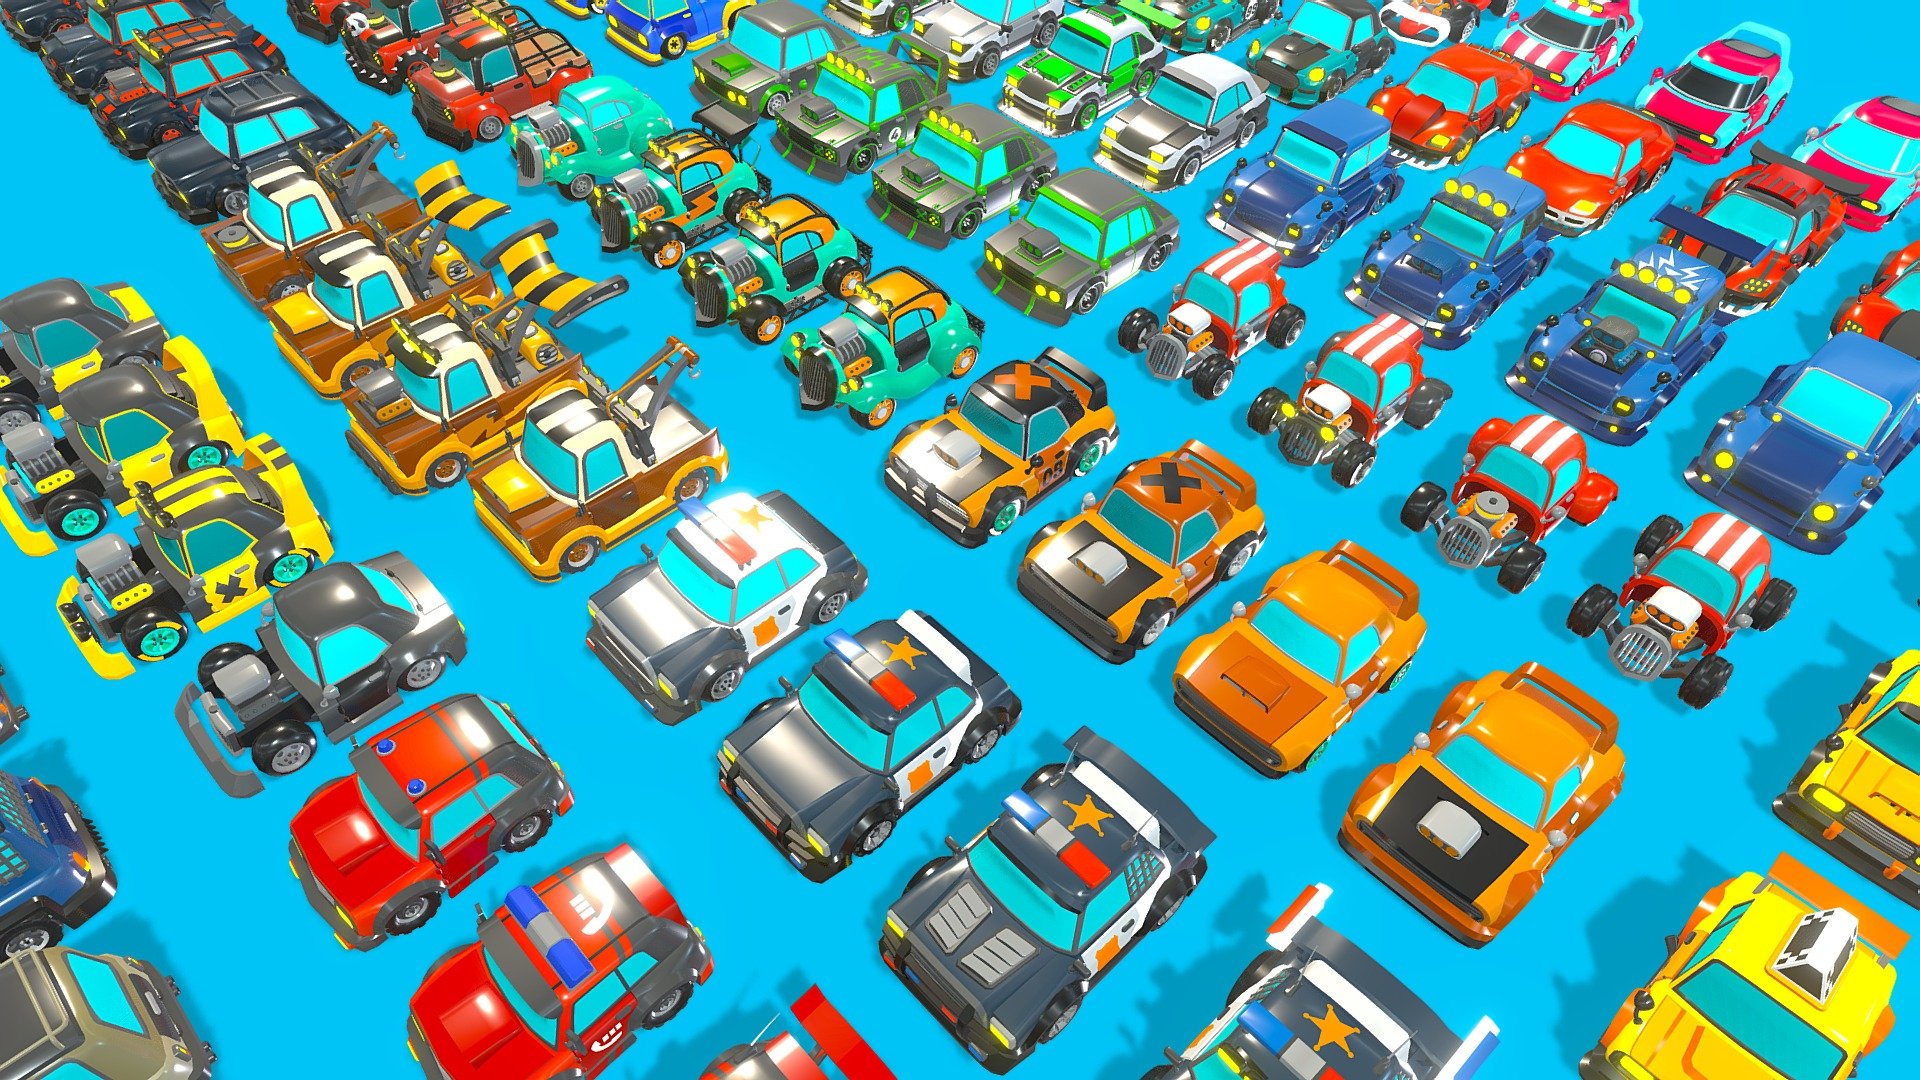 Get ready to add a touch of thrill and excellence to your mobile game projects with our complete edition of Stylize Vehicles! This delightful collection features total 80 (20VEH with 4 Upgrades) charming and first class cars, perfect for creating an engaging and visually appealing experience in your hypercasual games.

Give your mobile game the visual flair it deserves with our Low Poly Complete Edition of Vehicles Pack. Whether you're a seasoned game developer or just starting, this asset will help you create a captivating and memorable gaming experience that players won't be able to resist.

Start your journey to mobile gaming success today! Download our Low Poly Complete Edition of Vehicles Pack and inject a dose of super potential into your games 3d model